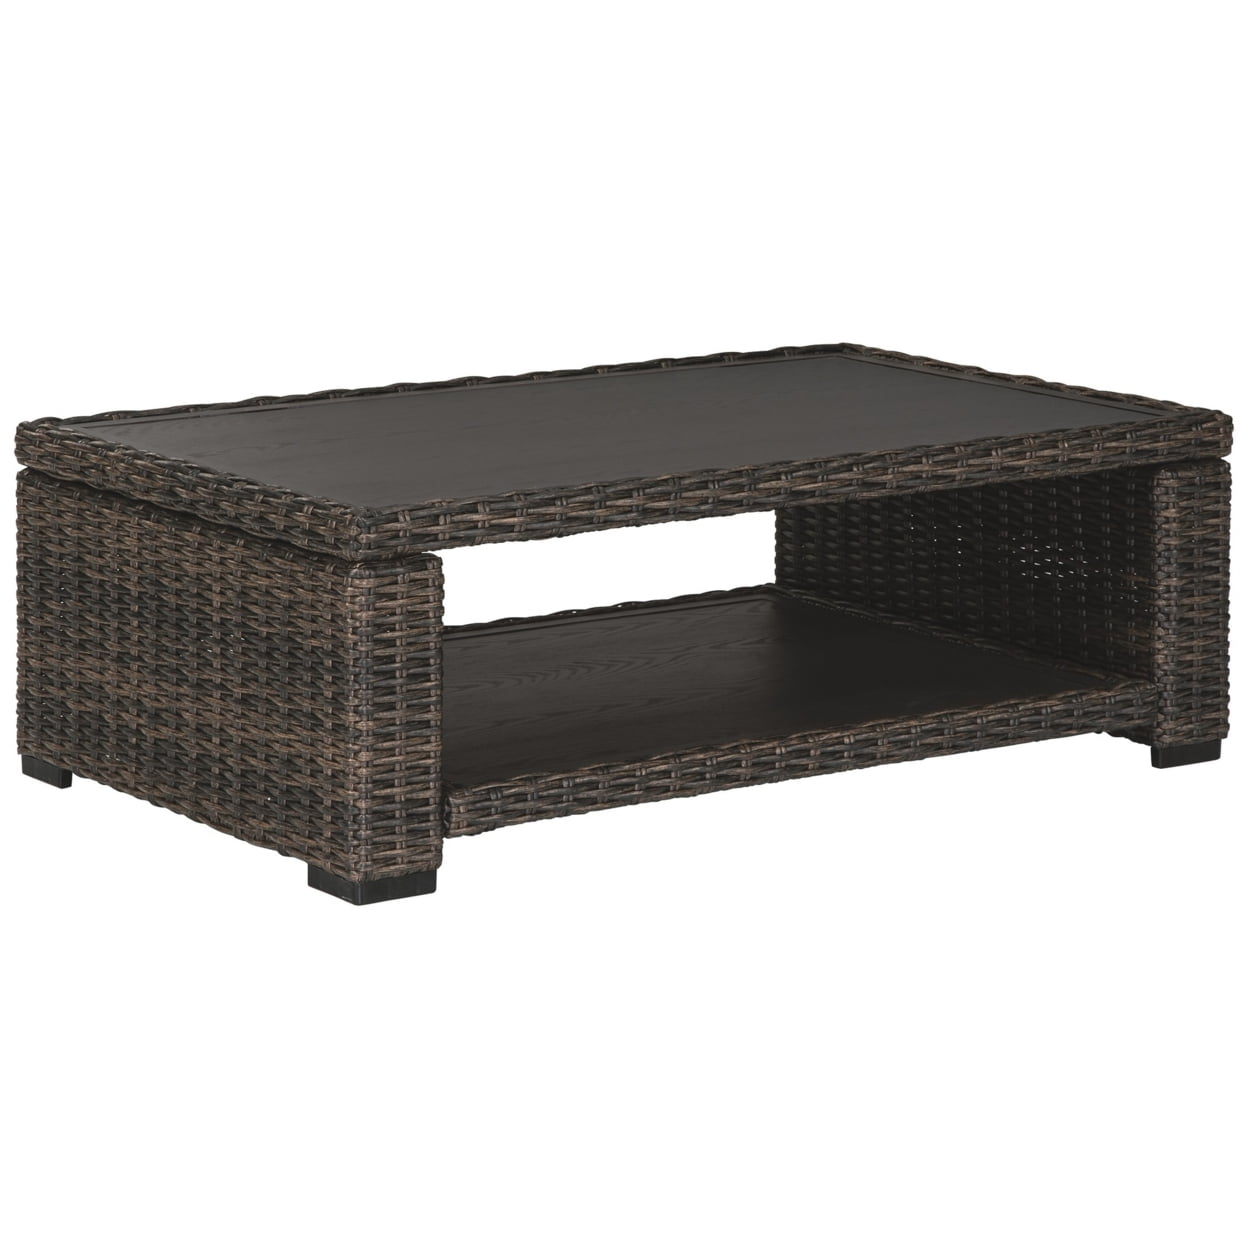 Picture of Benjara BM213312 Wicker Woven Aluminum Frame Cocktail Table with Open Shelf - Brown & Black - 16 x 48 x 30 in.